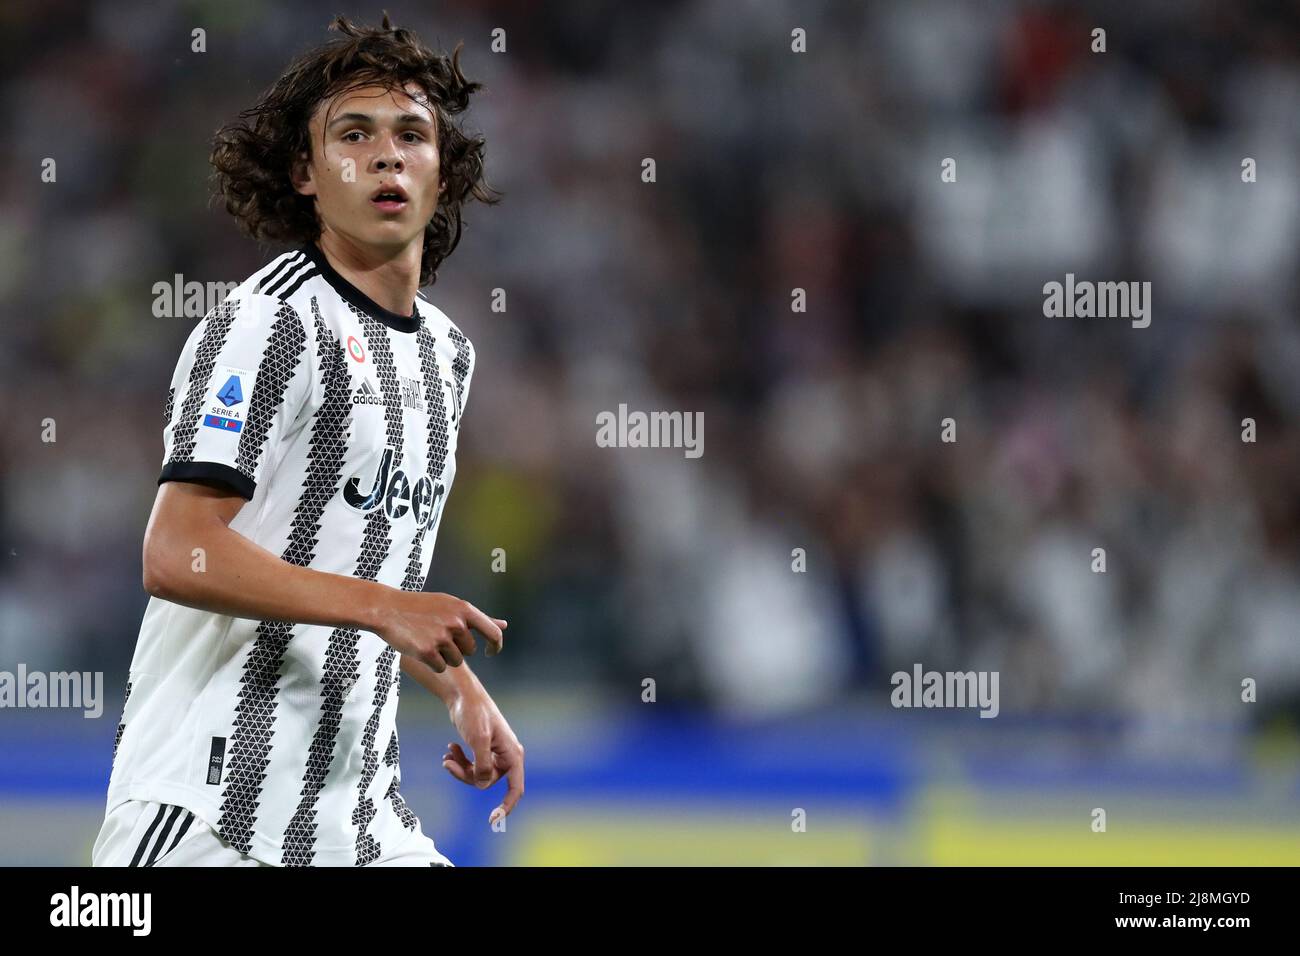 Turin, Italy. May, 16 2022, Martin Palumbo of Juventus Fc  looks on during the Serie A matchbetween Juventus Fc and Ss Lazio at Allianz Stadium on May, 16 2022 in Turin, Italy. Stock Photo